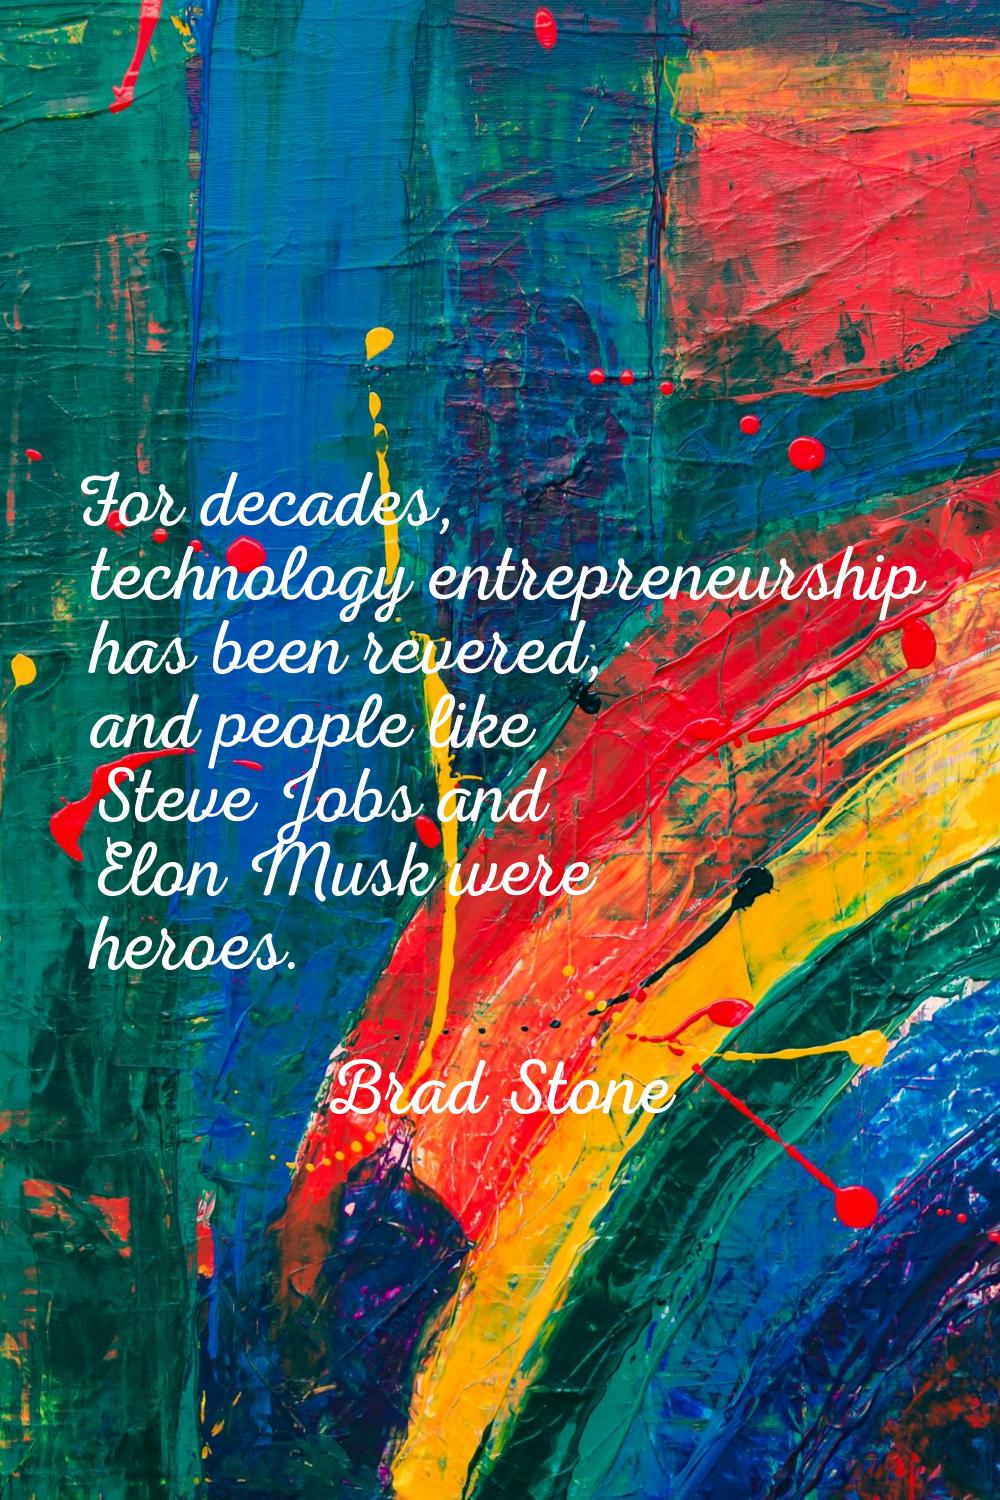 For decades, technology entrepreneurship has been revered, and people like Steve Jobs and Elon Musk